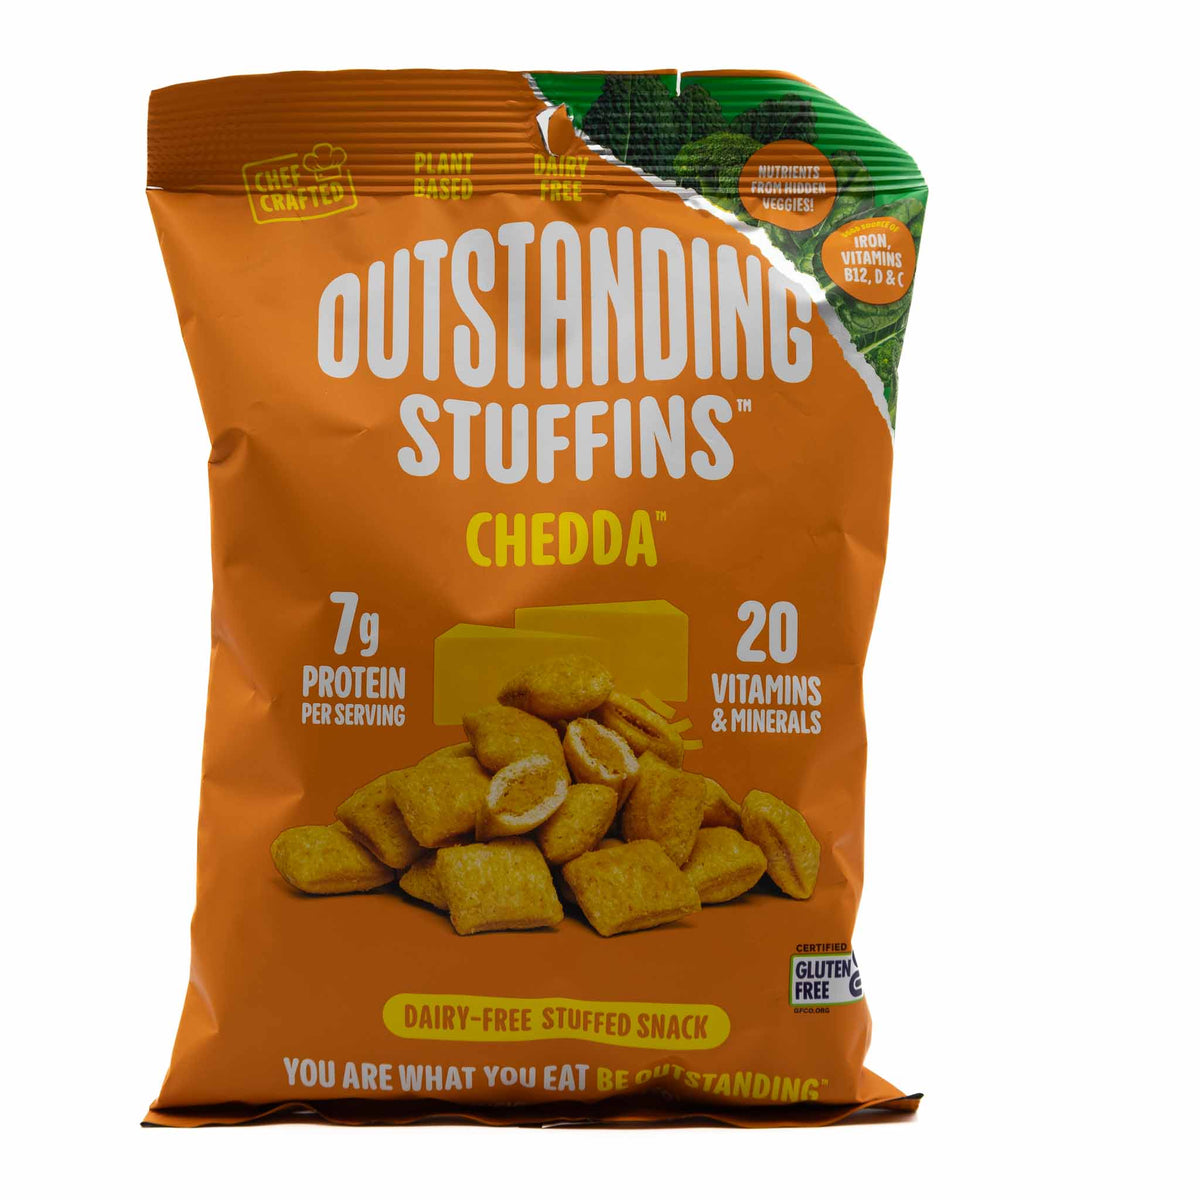 Outstanding Stuffins Cheddar